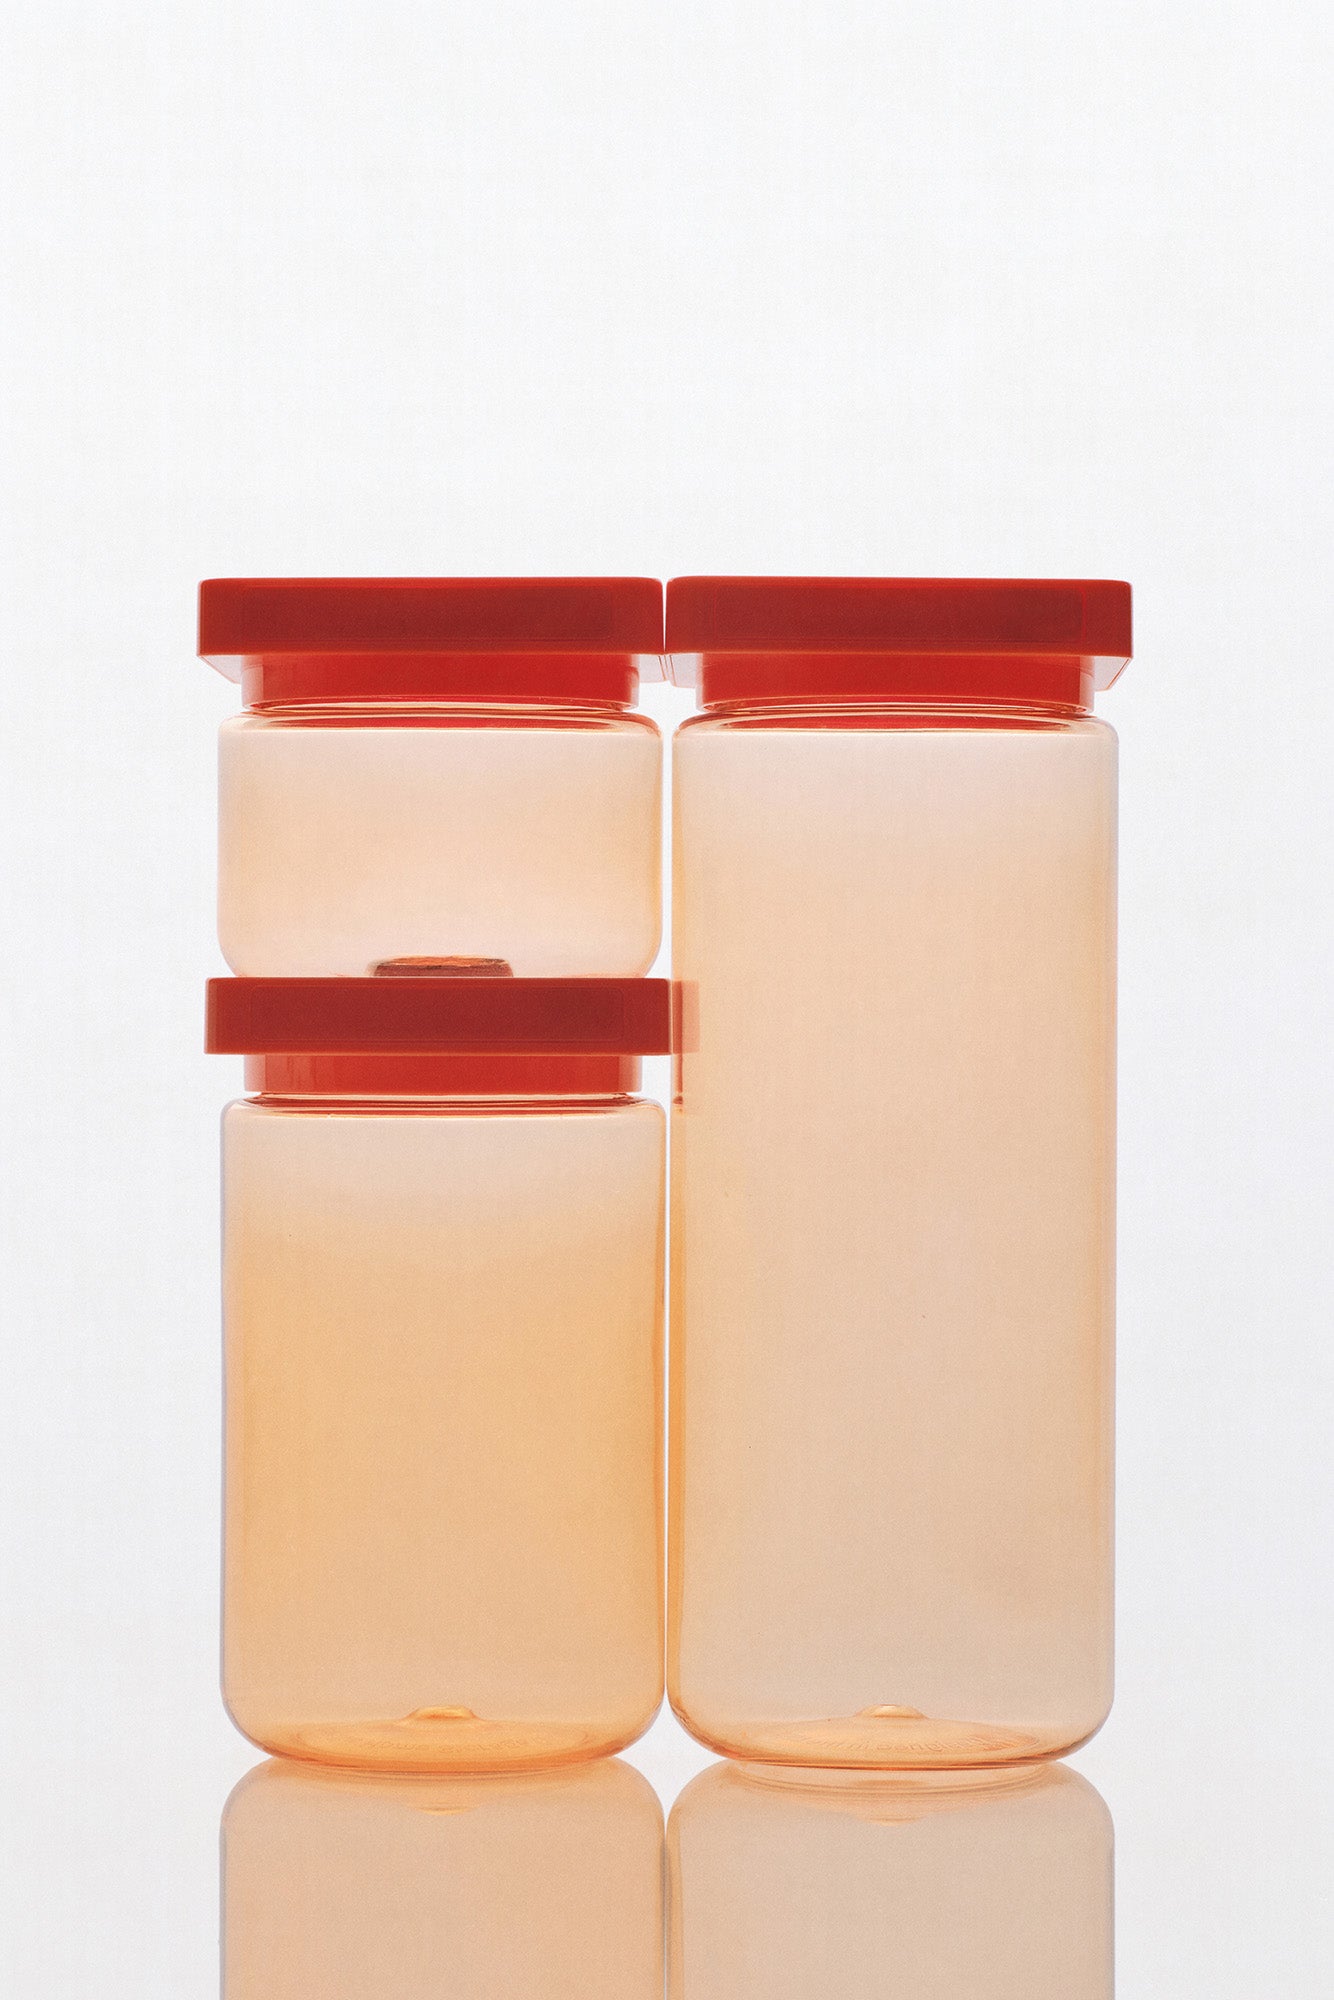 Family 3-Pack Container by Cliik - Orange